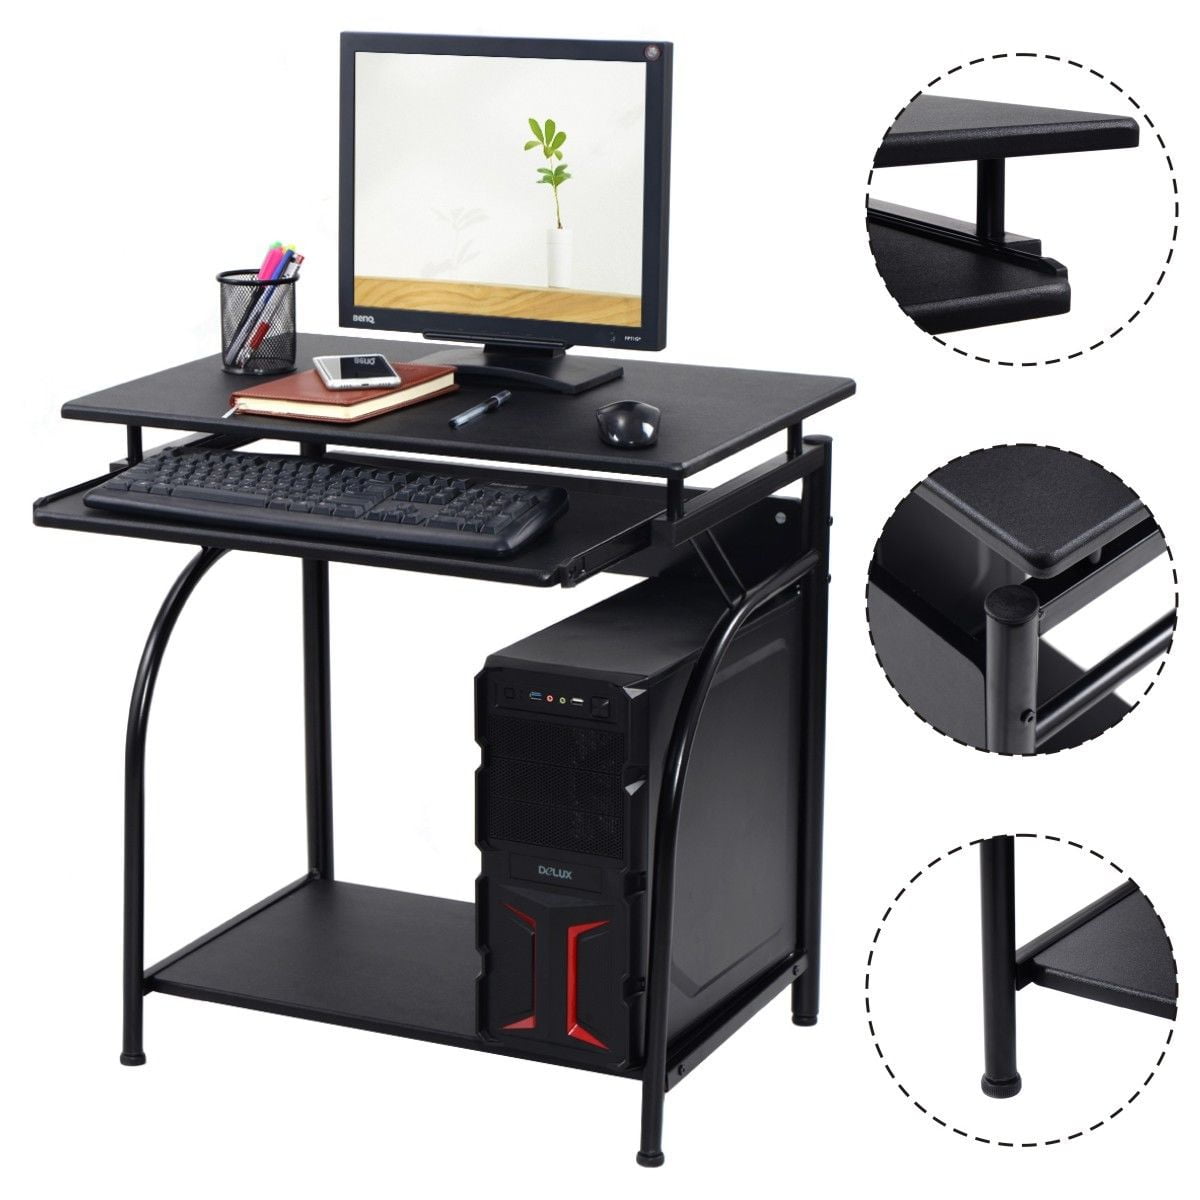 Details about   Computer Desk PC Laptop Table Study Workstation Home Office w/ Drawer Furniture